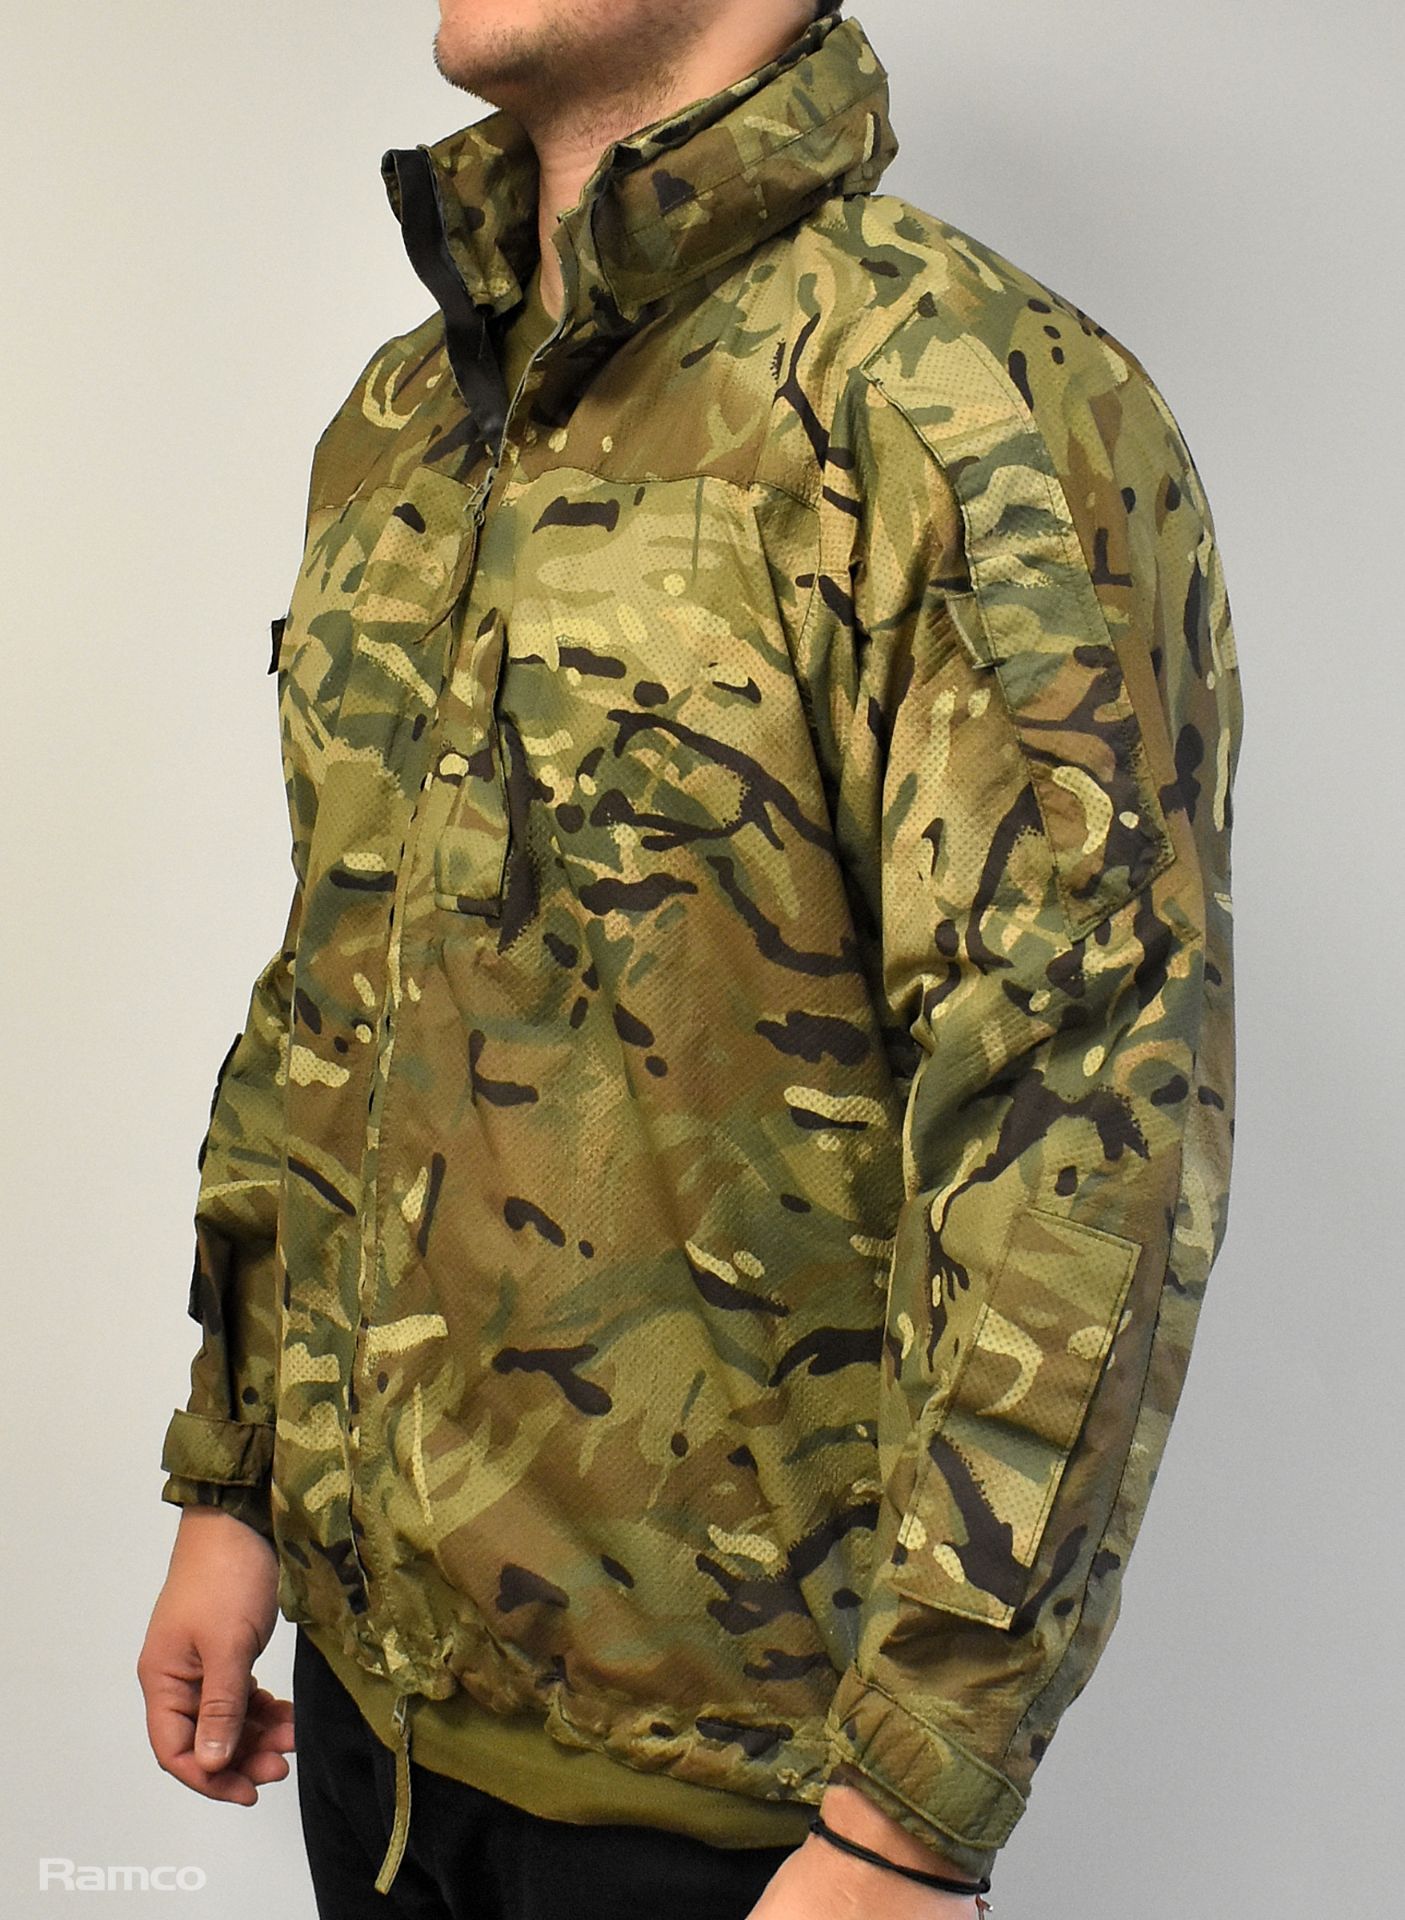 80x British Army MTP waterproof lightweight jackets - mixed grades and sizes - Image 2 of 11